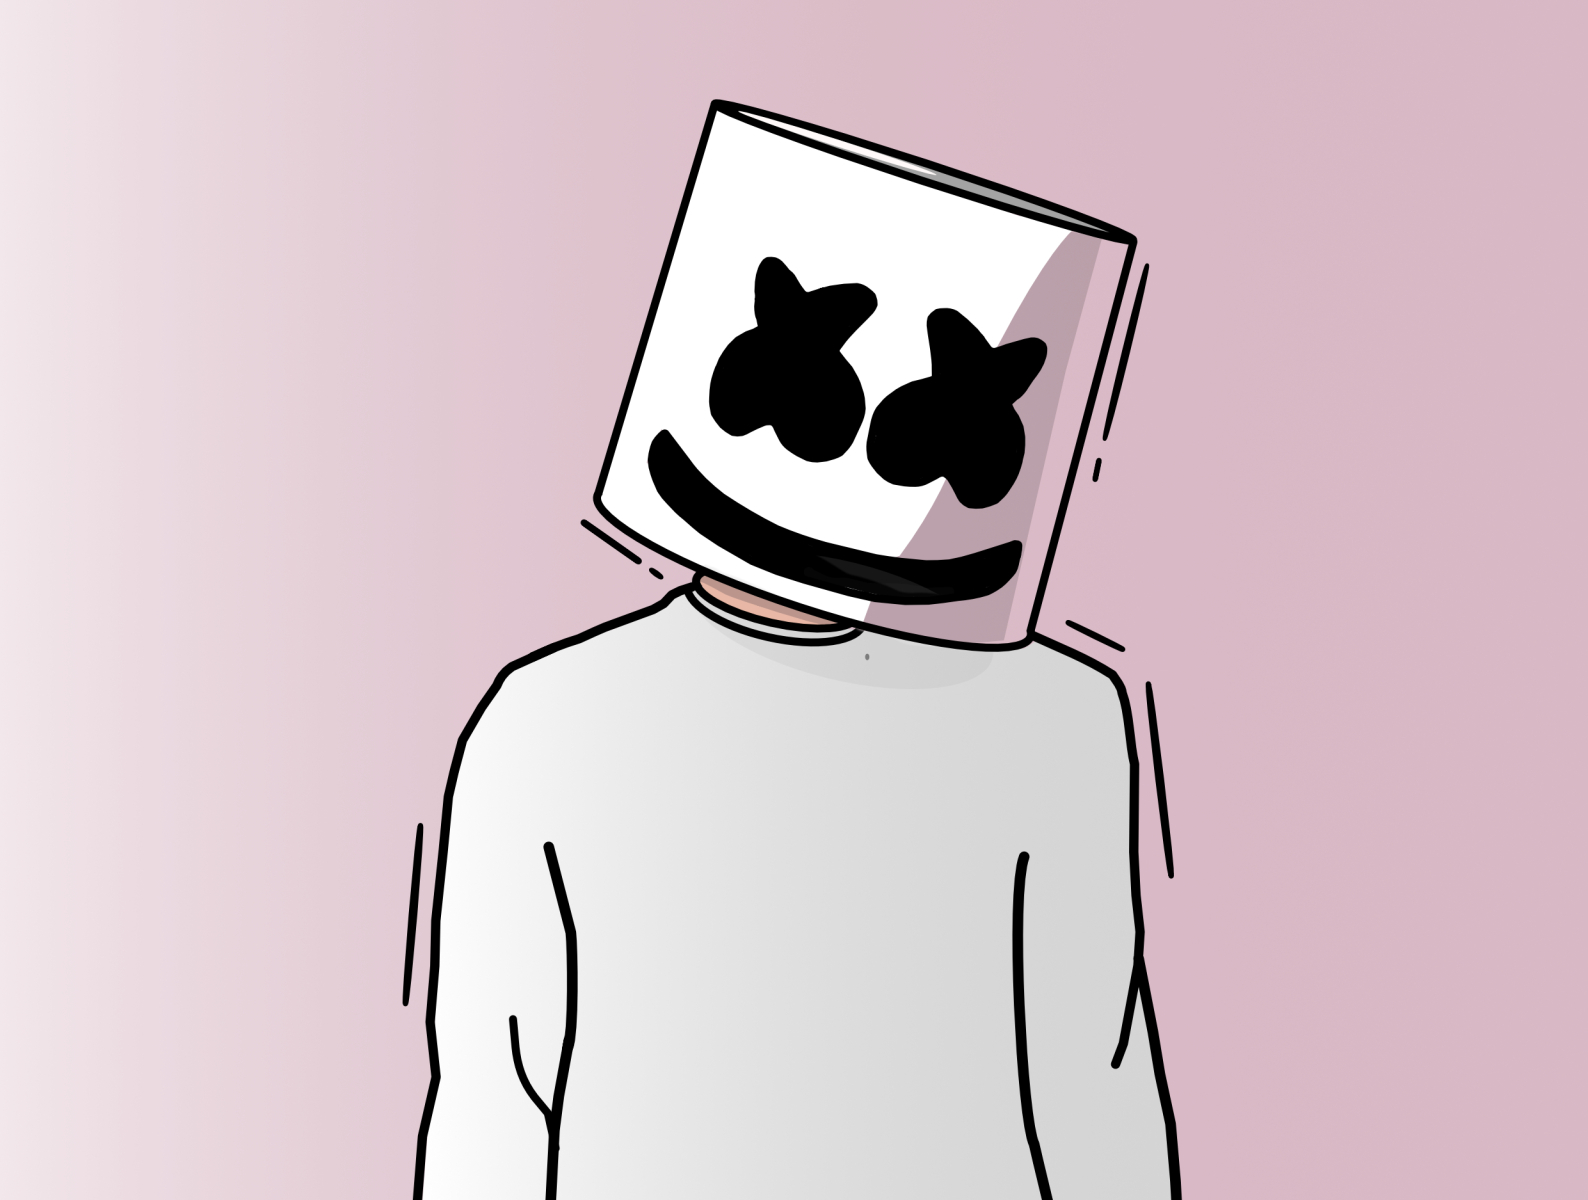 Marshmello Fortnite Coloring Page for Kids - Free Fortnite Printable  Coloring Pages Online for Kids - ColoringPages101.com | Coloring Pages for  Kids